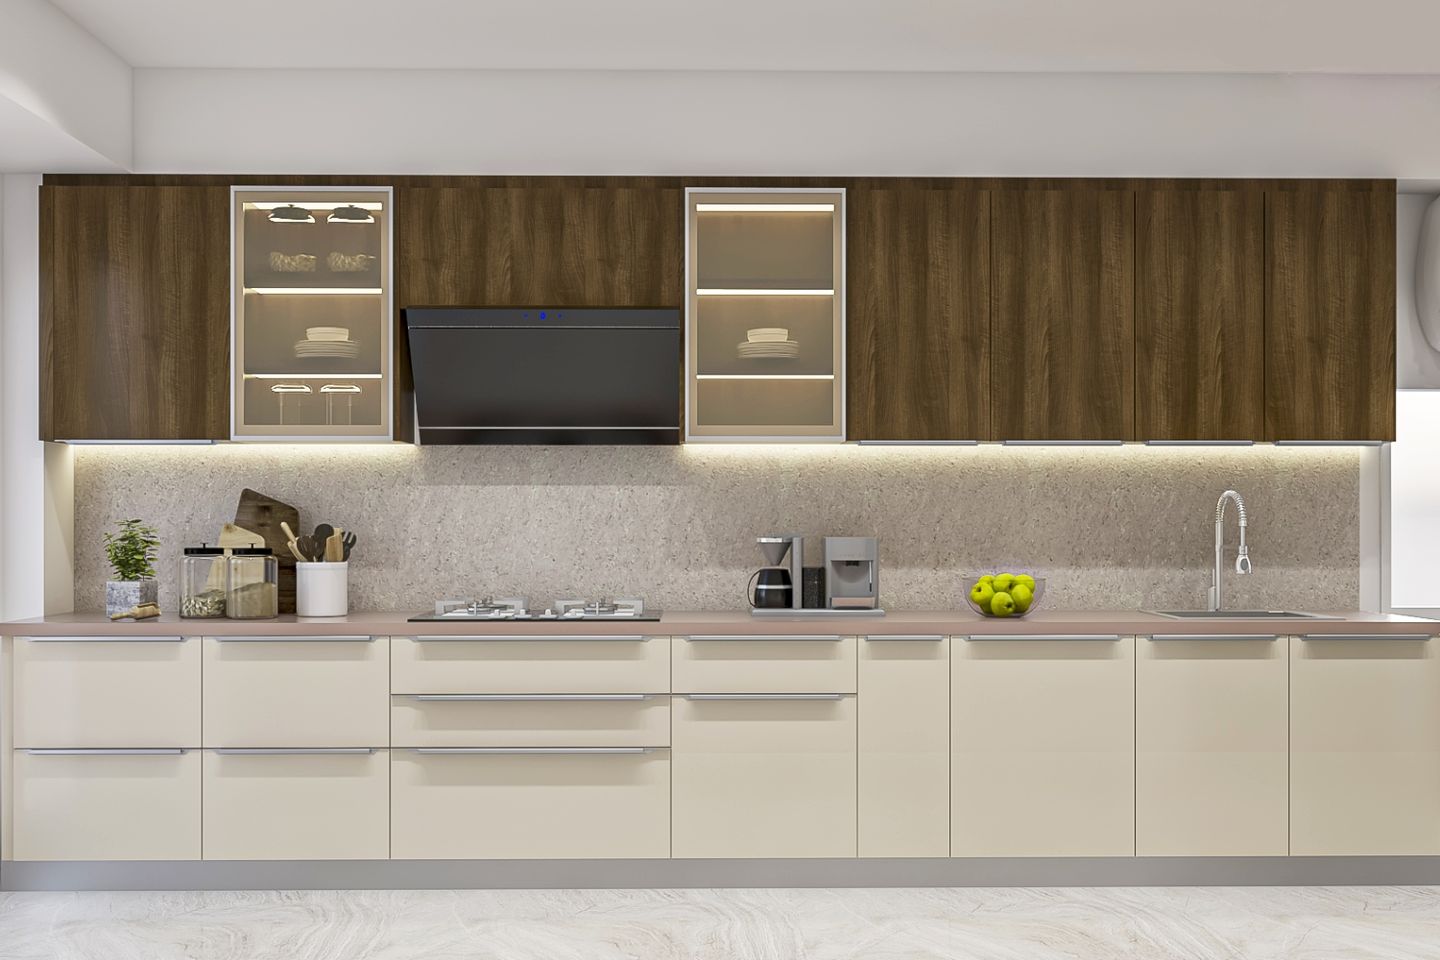 Modular Straight Kitchen Cabinet Design With With Champagne And Wood Cabinets - Livspace